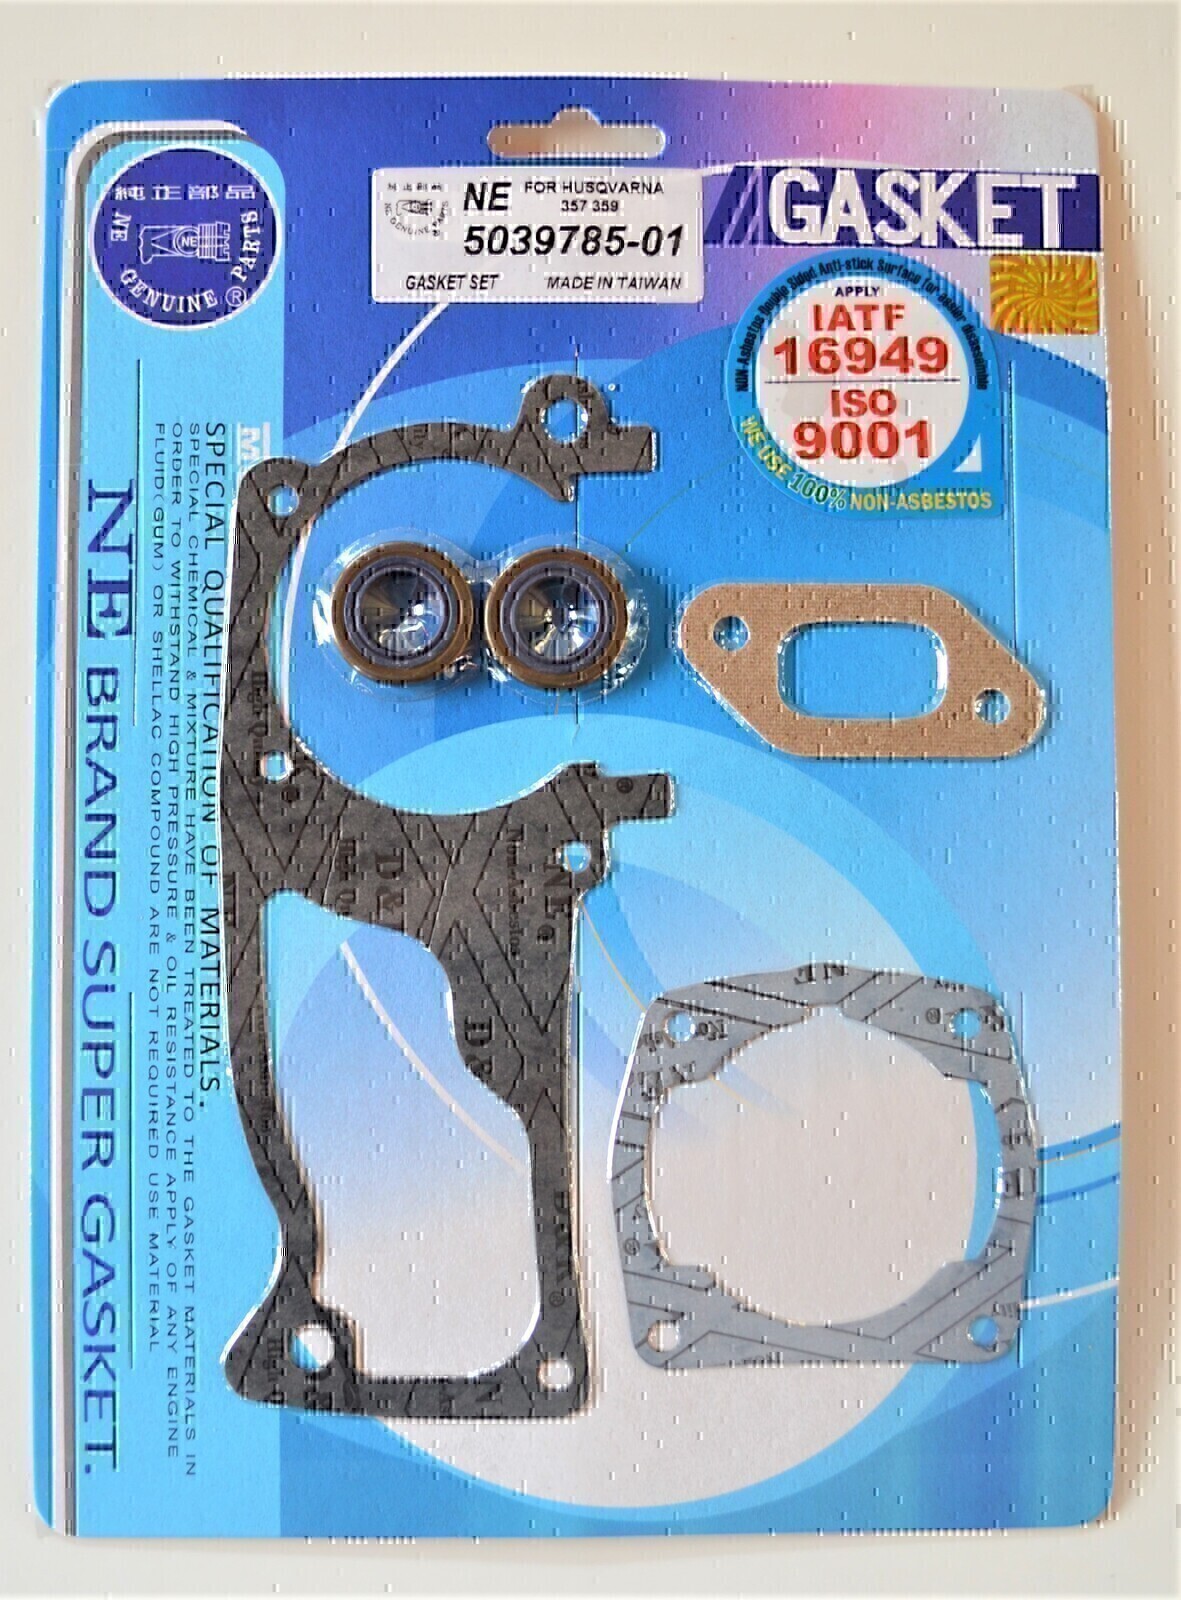 COMPLETE GASKET & OIL SEAL KIT FOR HUSQVARNA 357 359 CHAINSAW